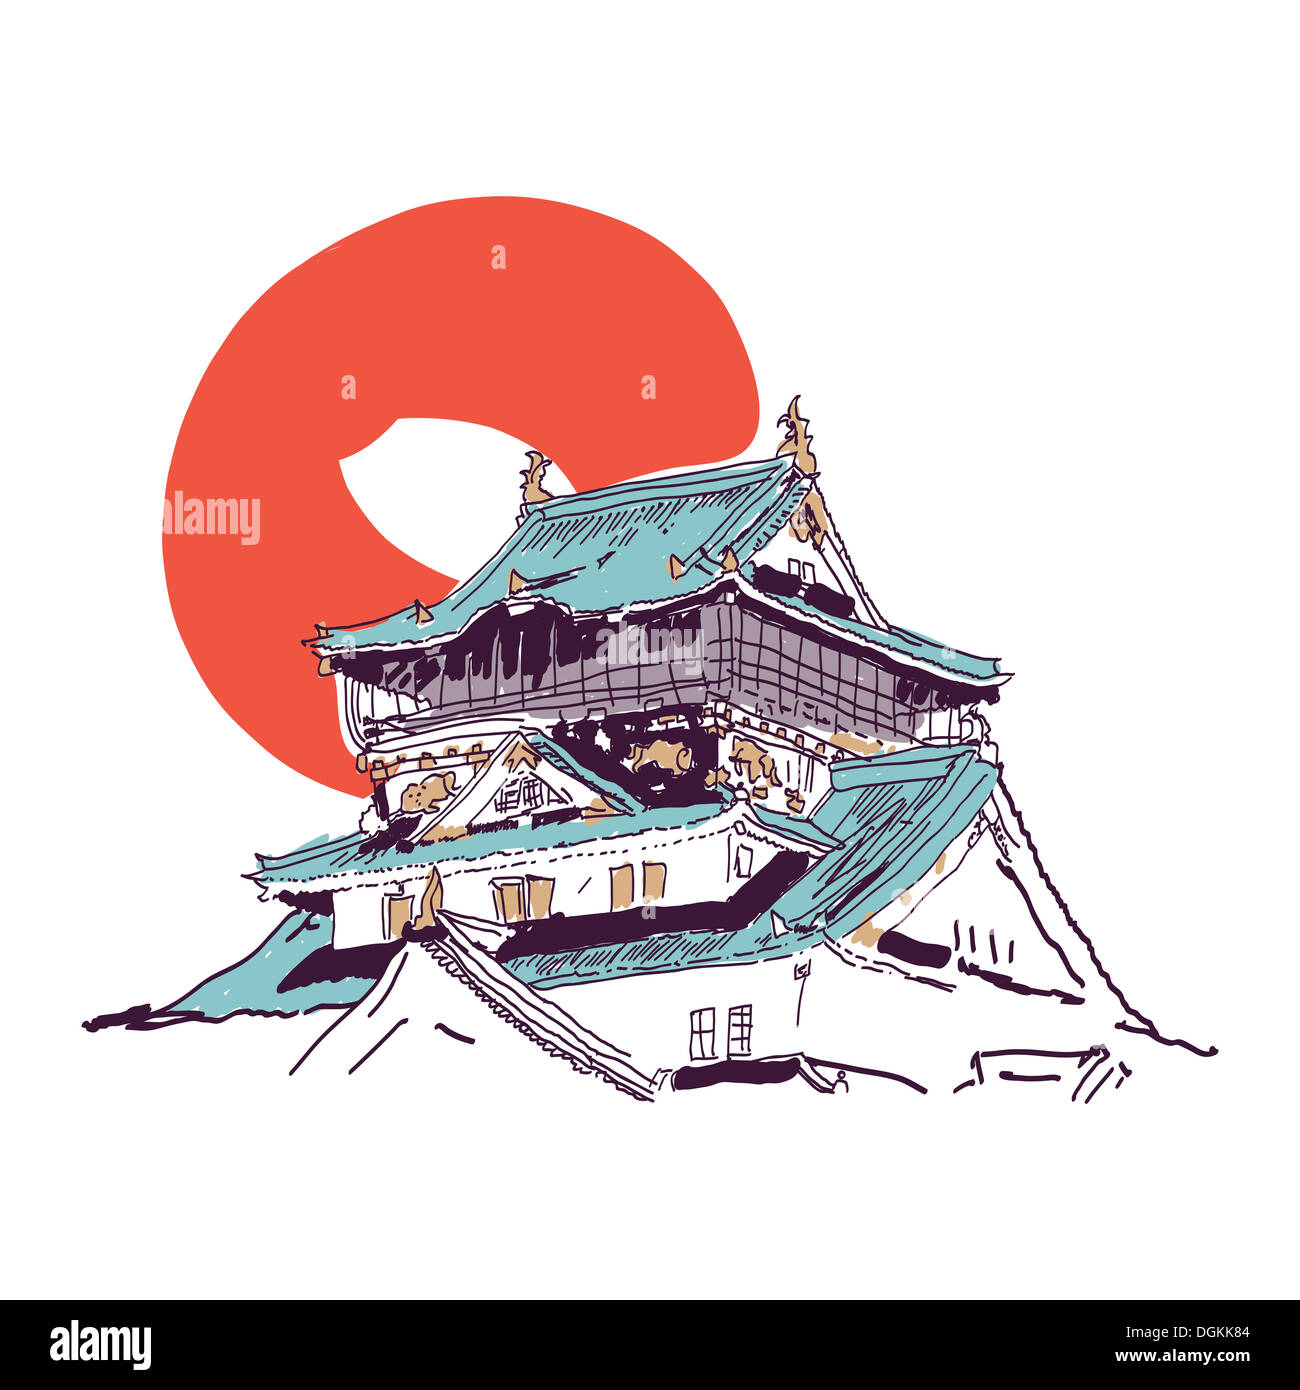 Premium AI Image  A drawing of a traditional japanese house